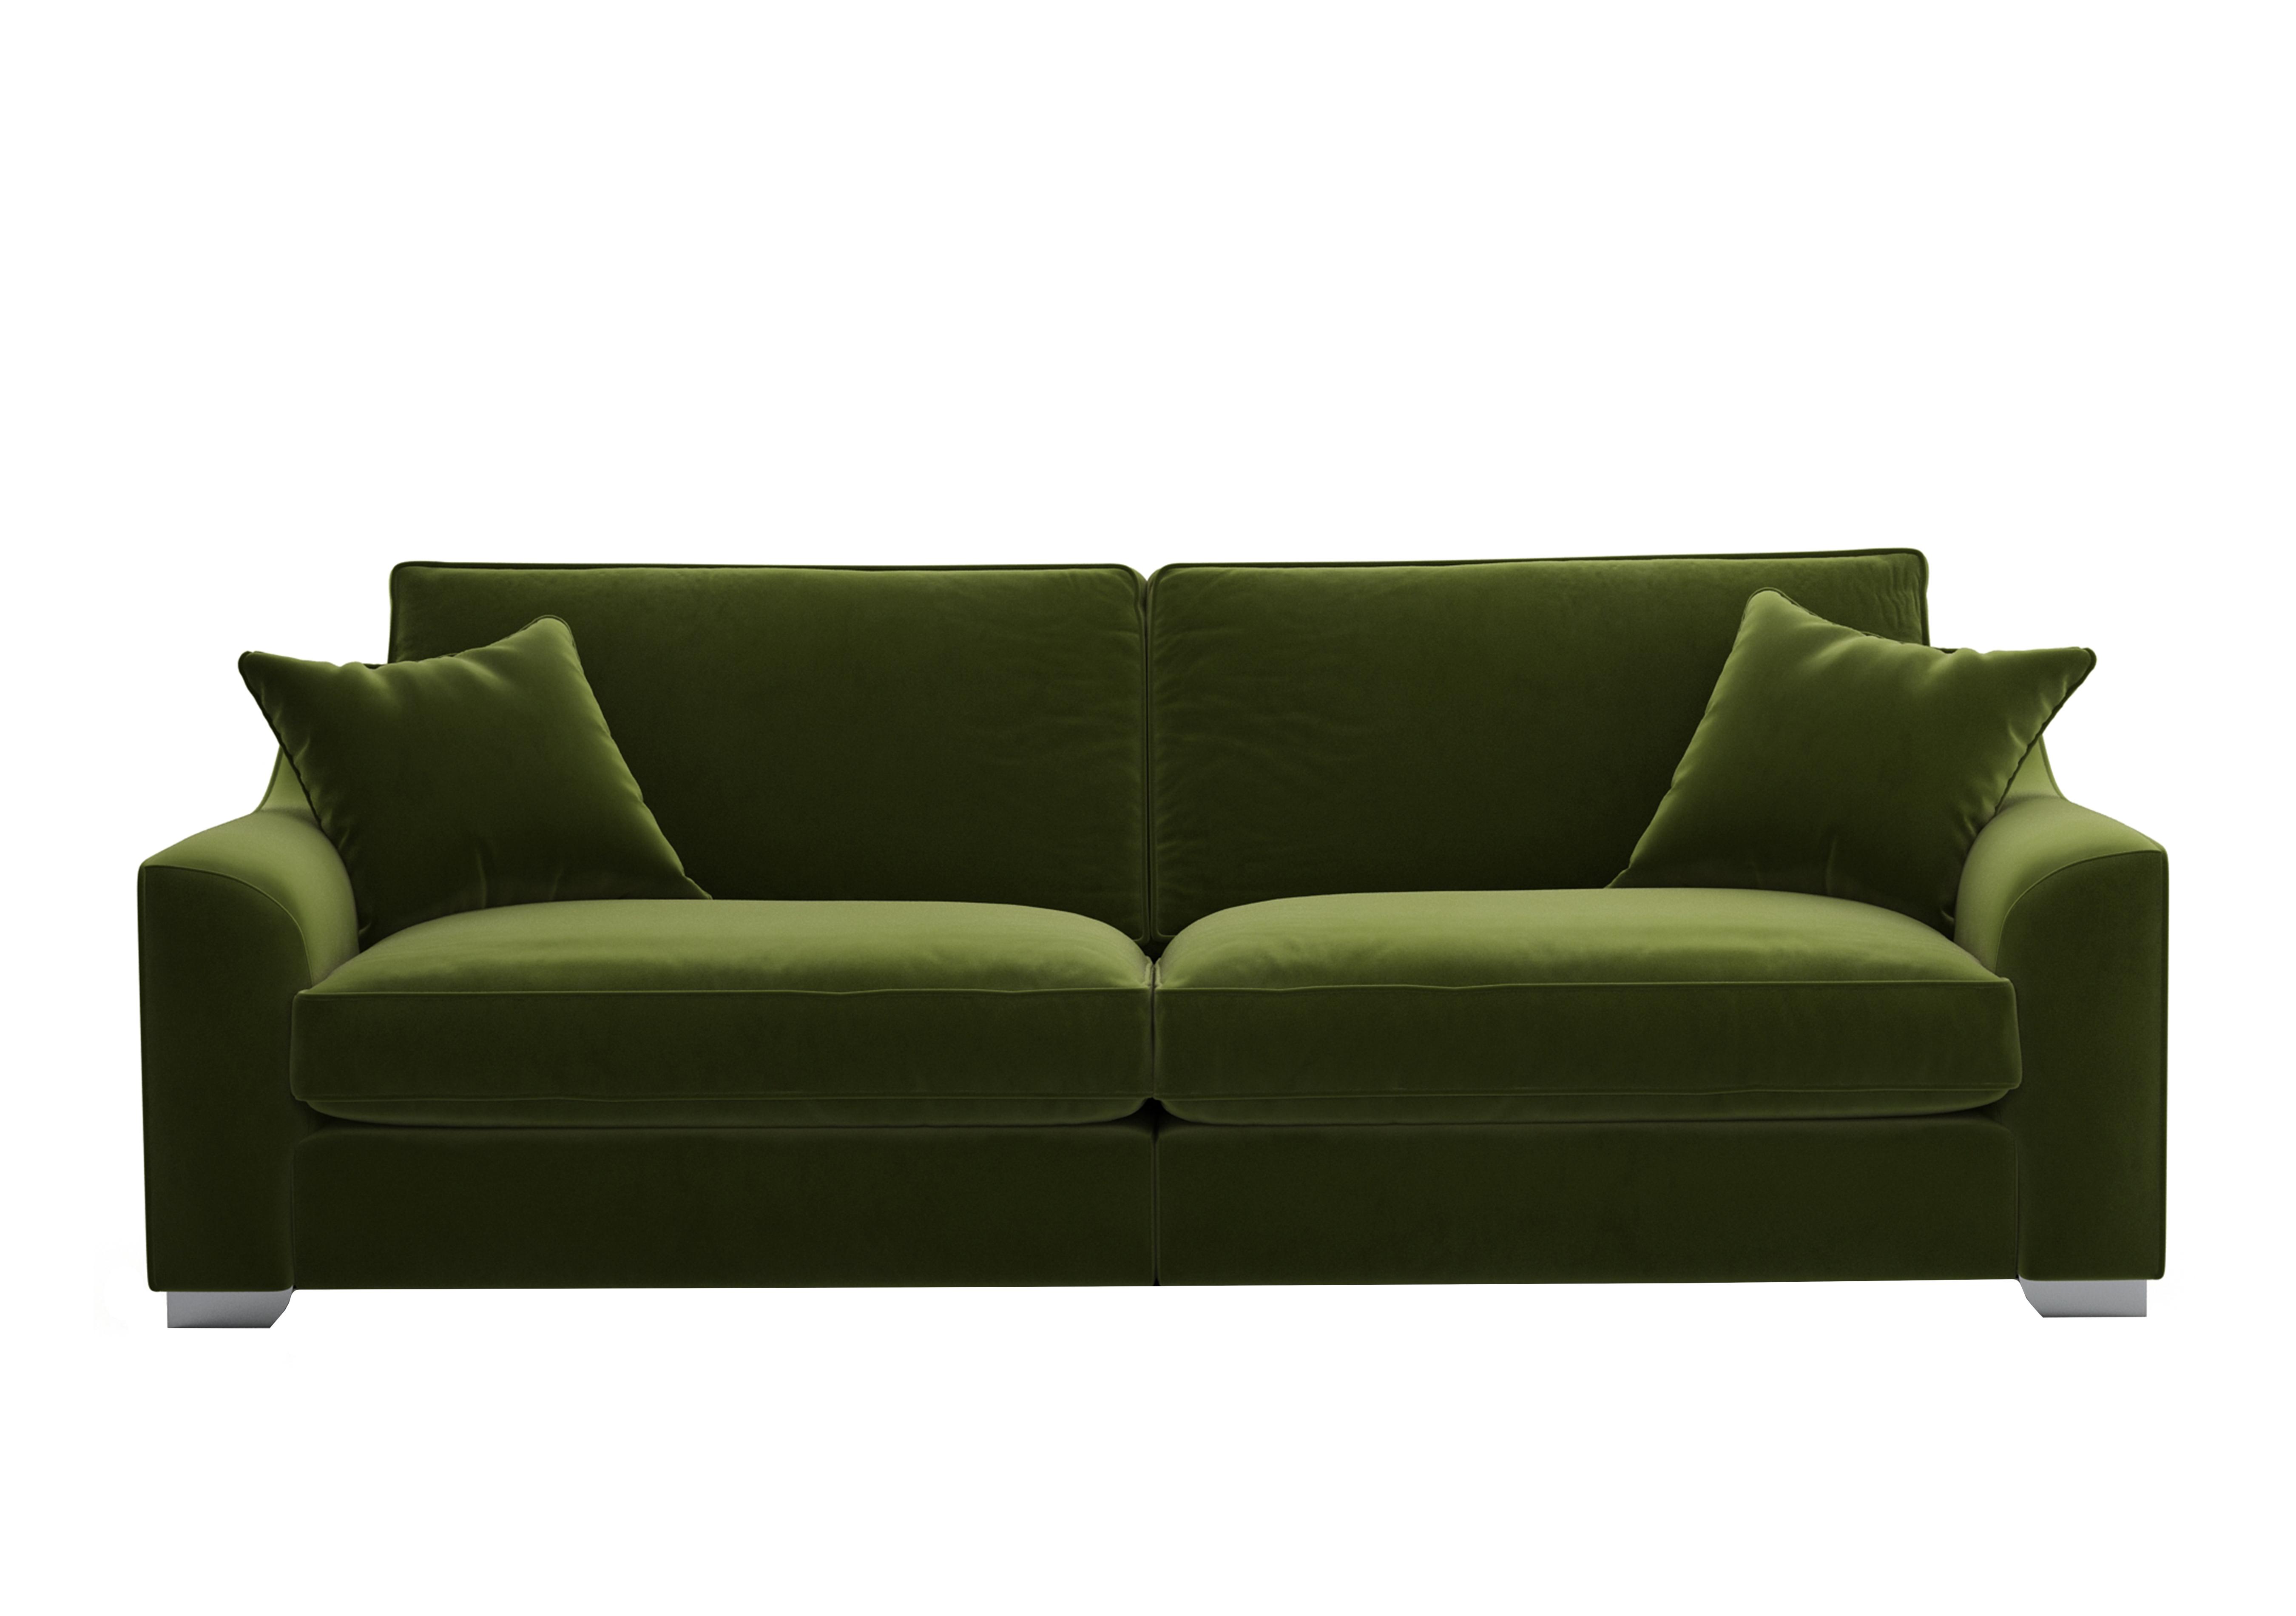 Isobel 4 Seater Fabric Sofa in Woo160 Woodland Moss Ch Ft on Furniture Village